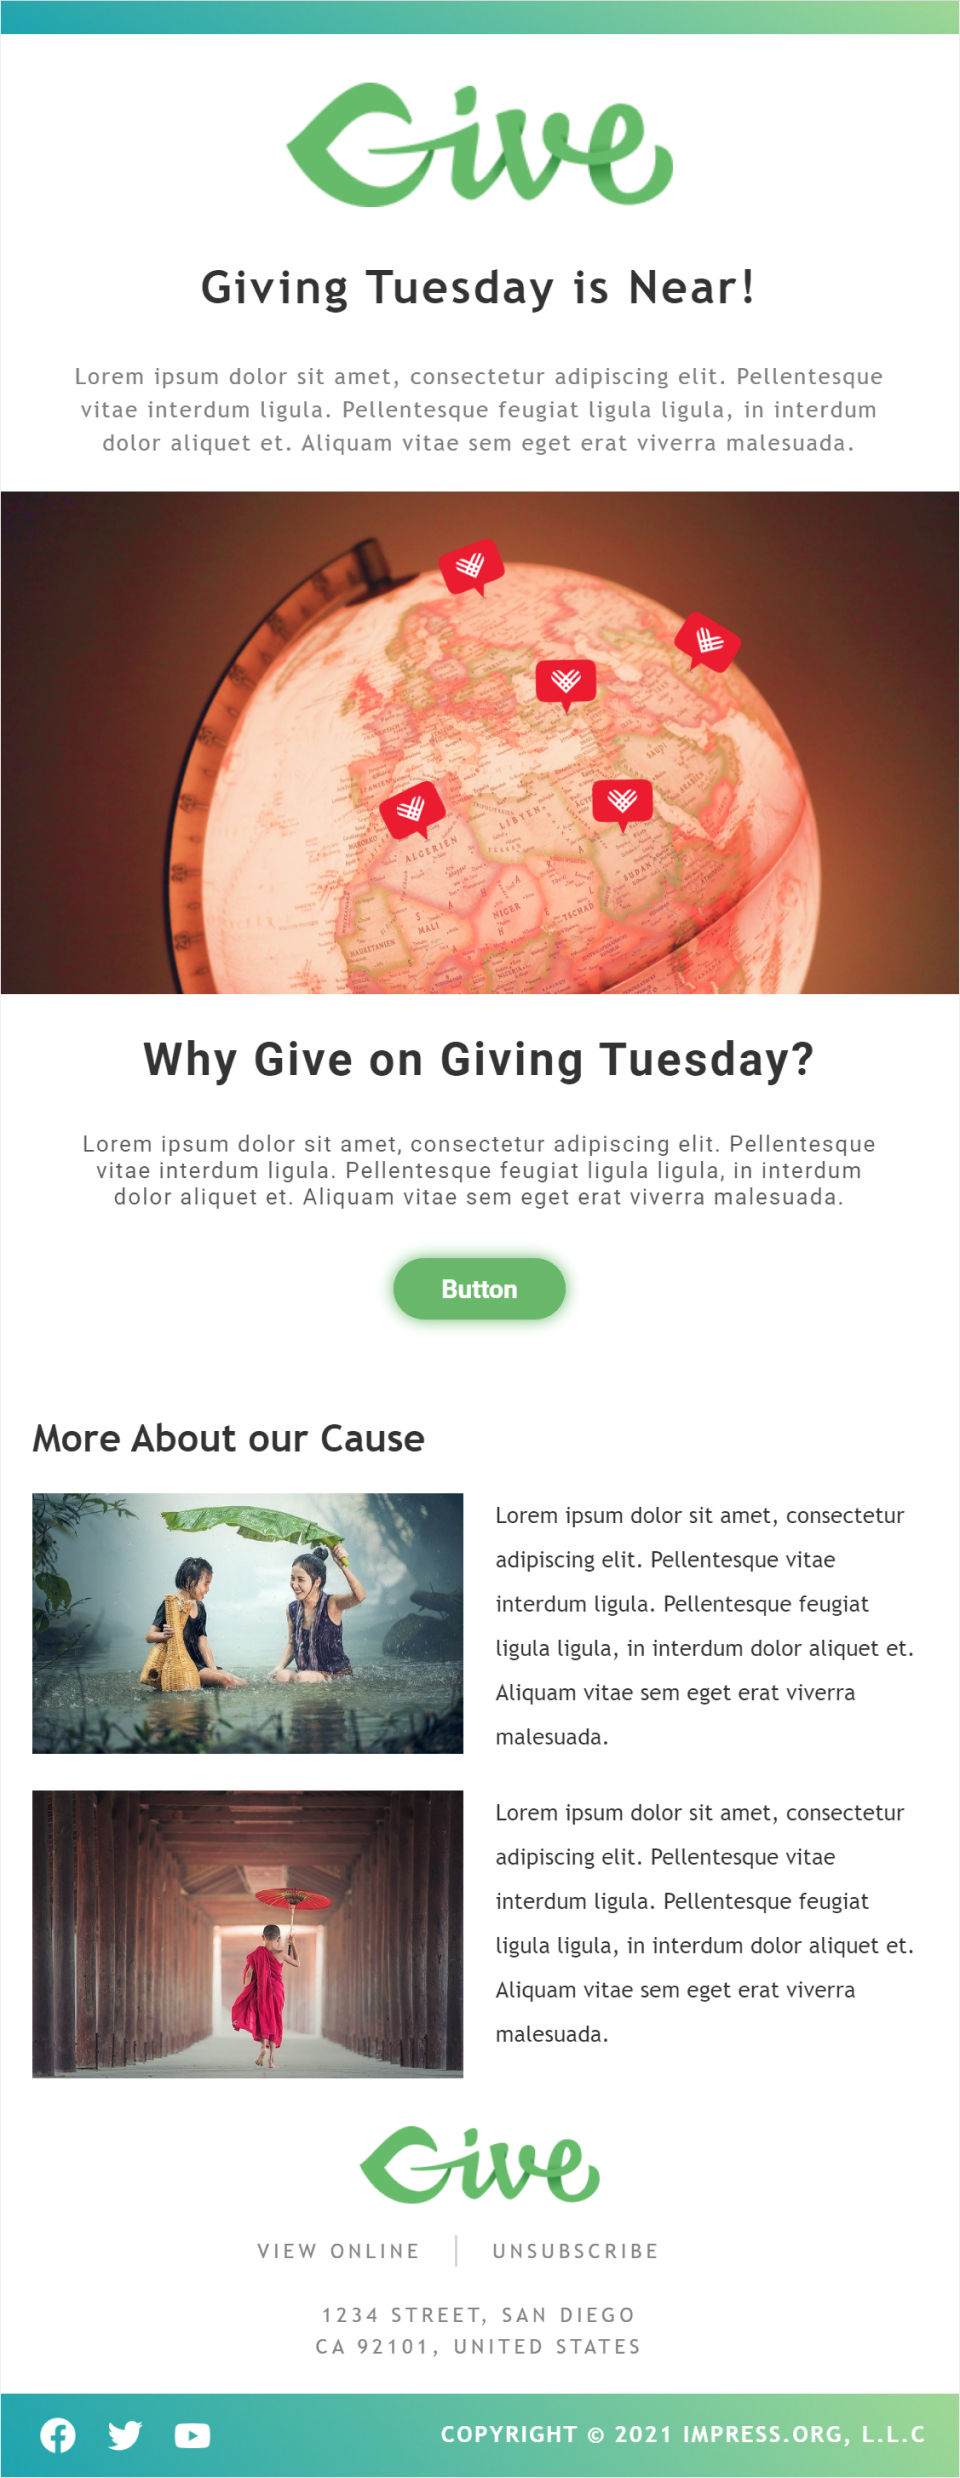 A screenshot of the email template with header, lorem ipsum filler text, buttons and an About our Cause section.